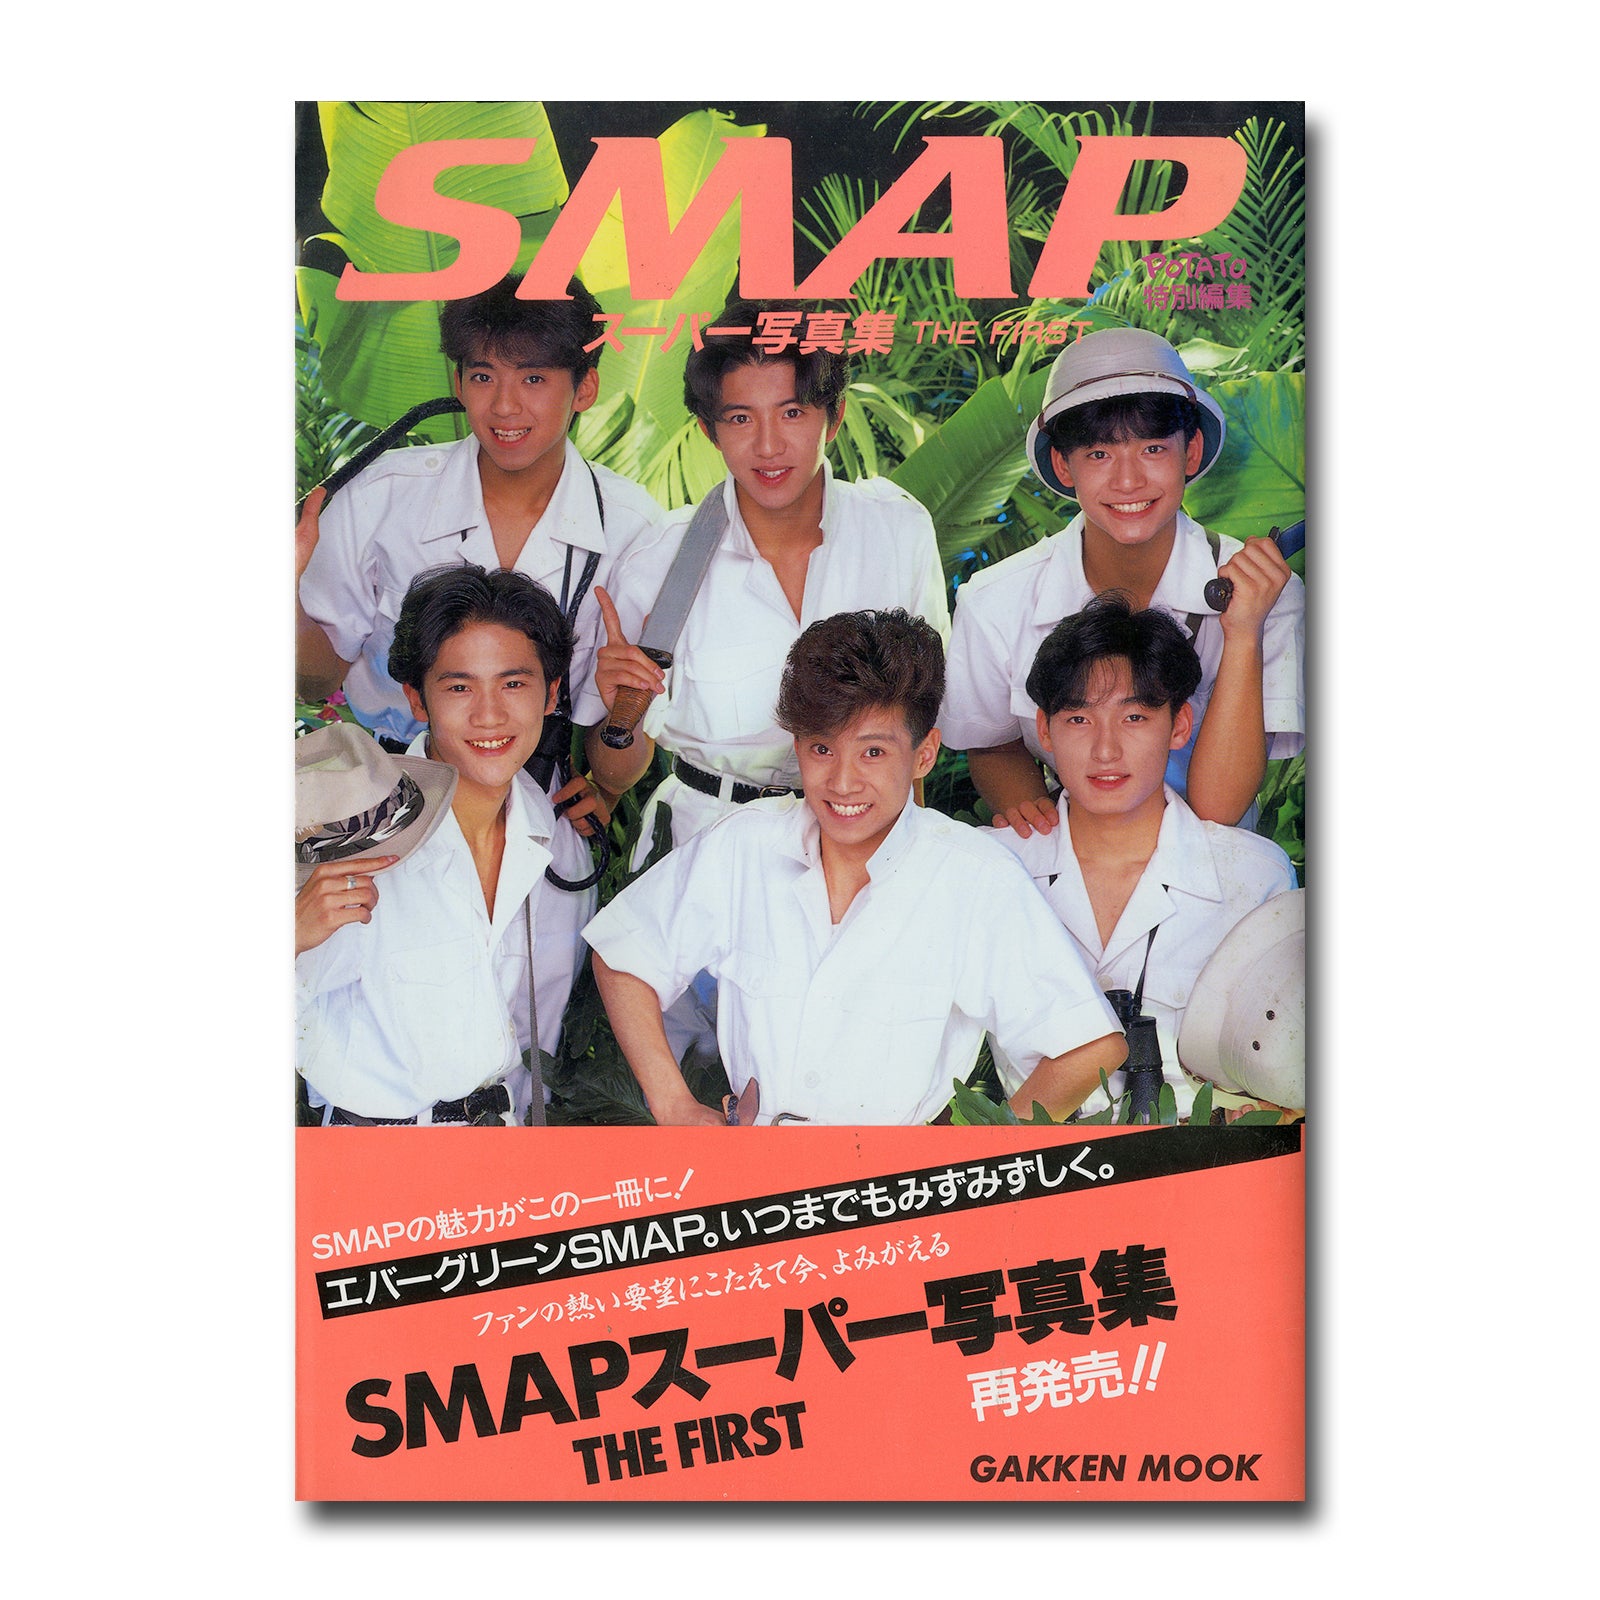 SMAPスーパー写真集 THE FIRST – Books Channel Store